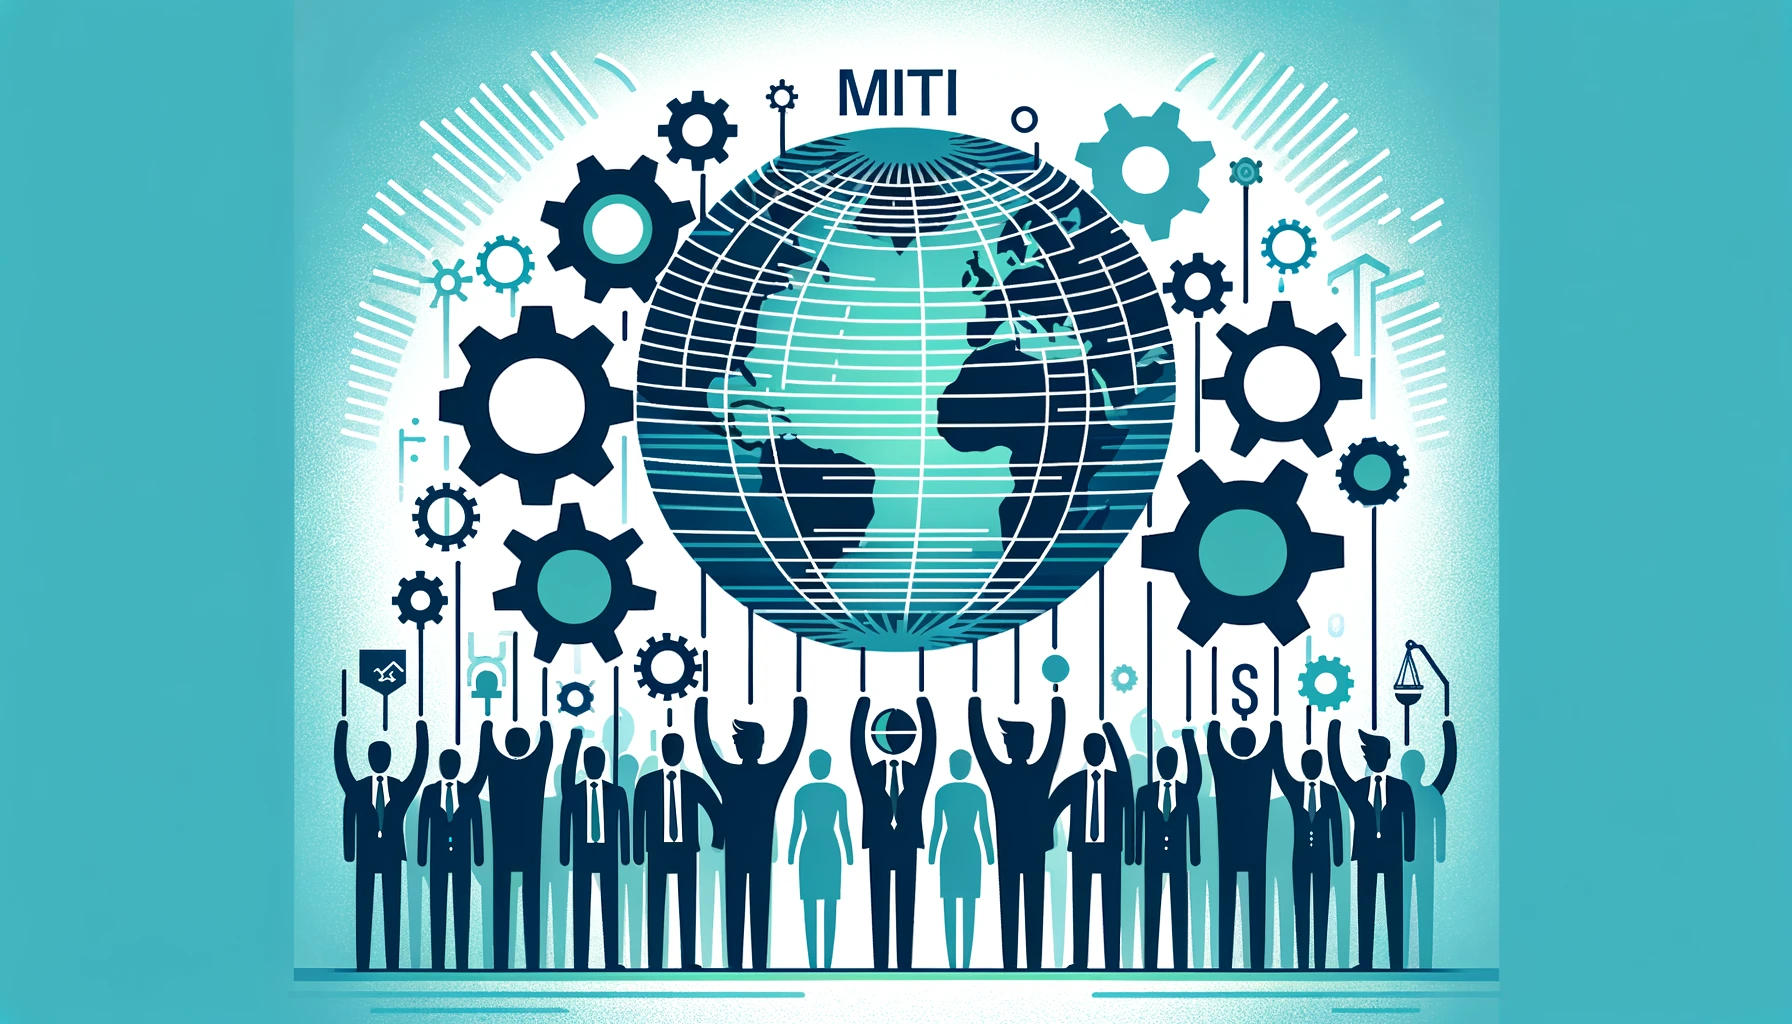 MITI advocates for a great trade agenda, urging collective progress in the pursuit of excellence.